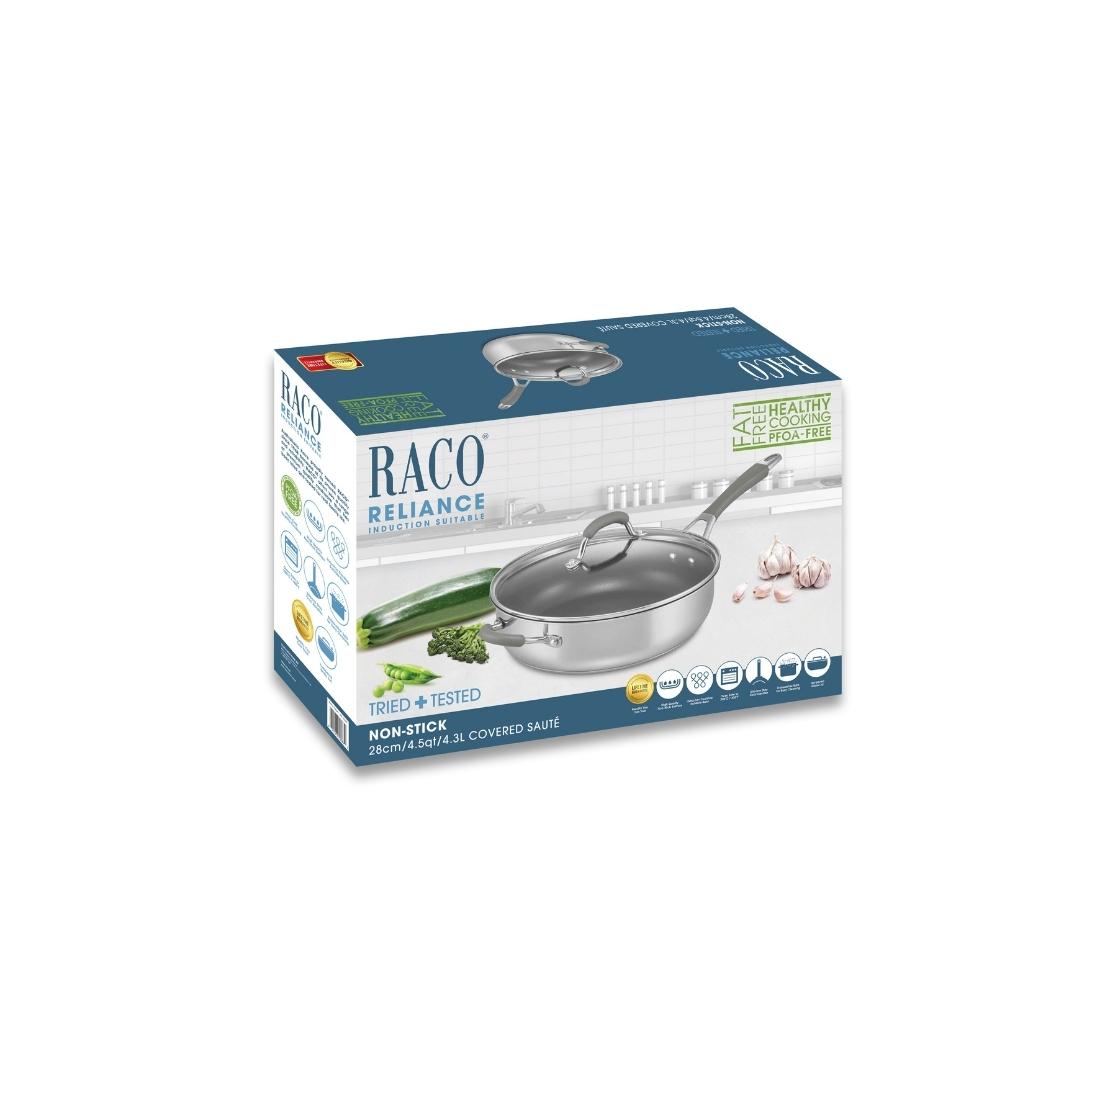 RACO Reliance Stainless Steel Induction Nonstick Covered Sauté 28cm